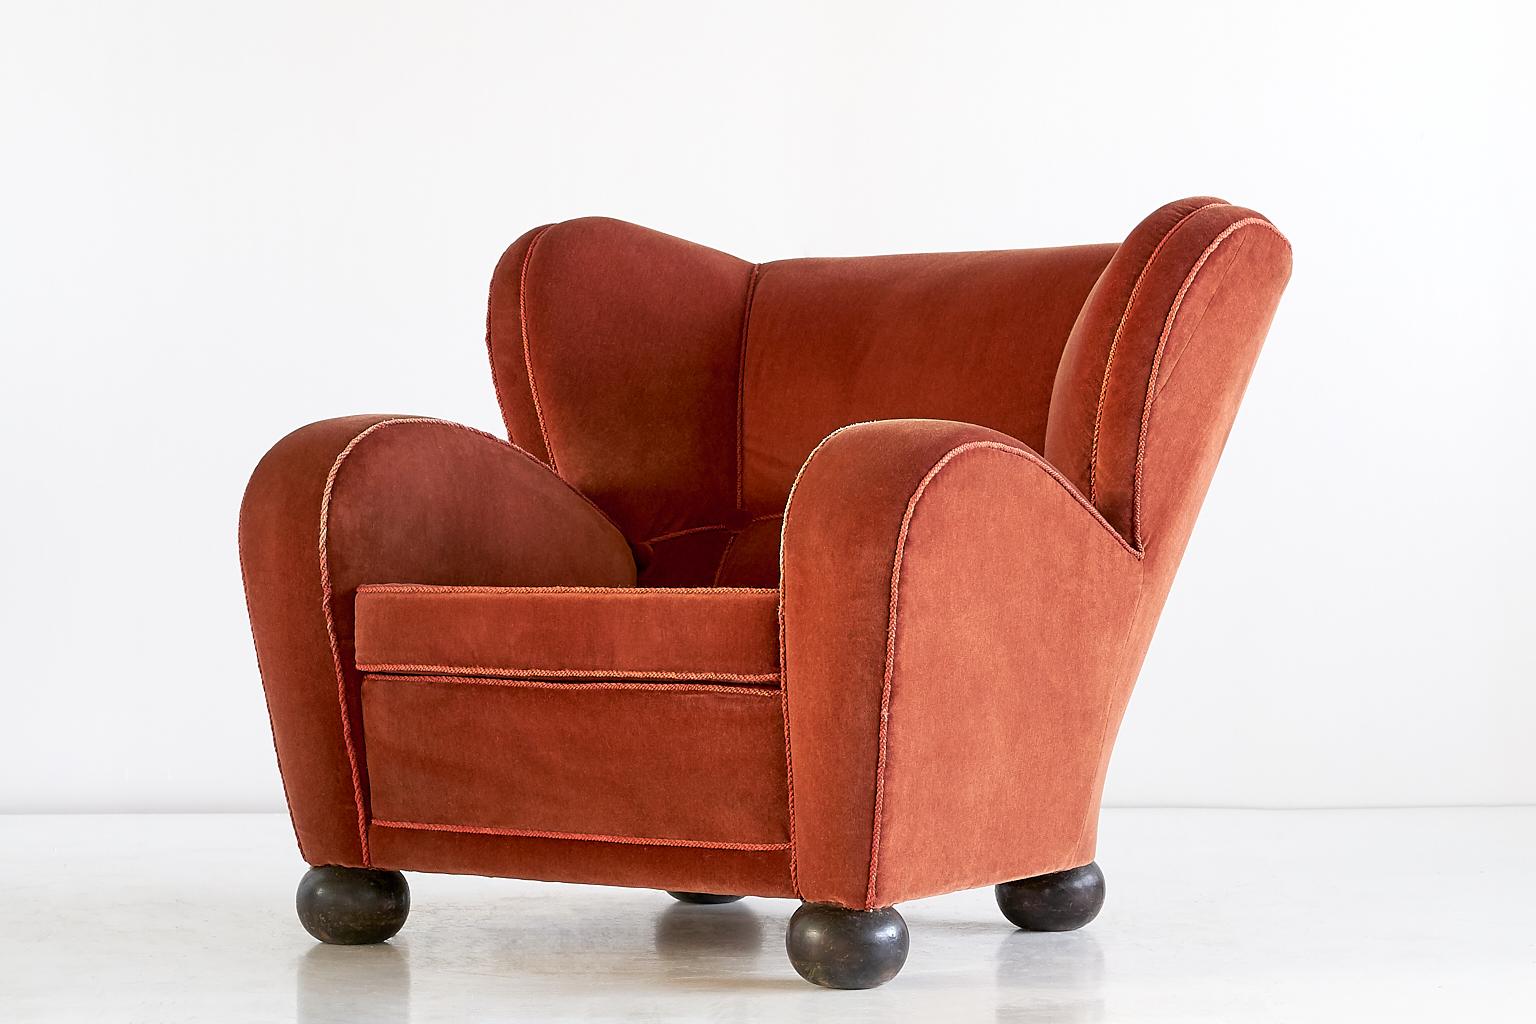 Mid-20th Century Märta Blomstedt Armchair in Mohair Designed for Hotel Aulanko, Finland, 1939